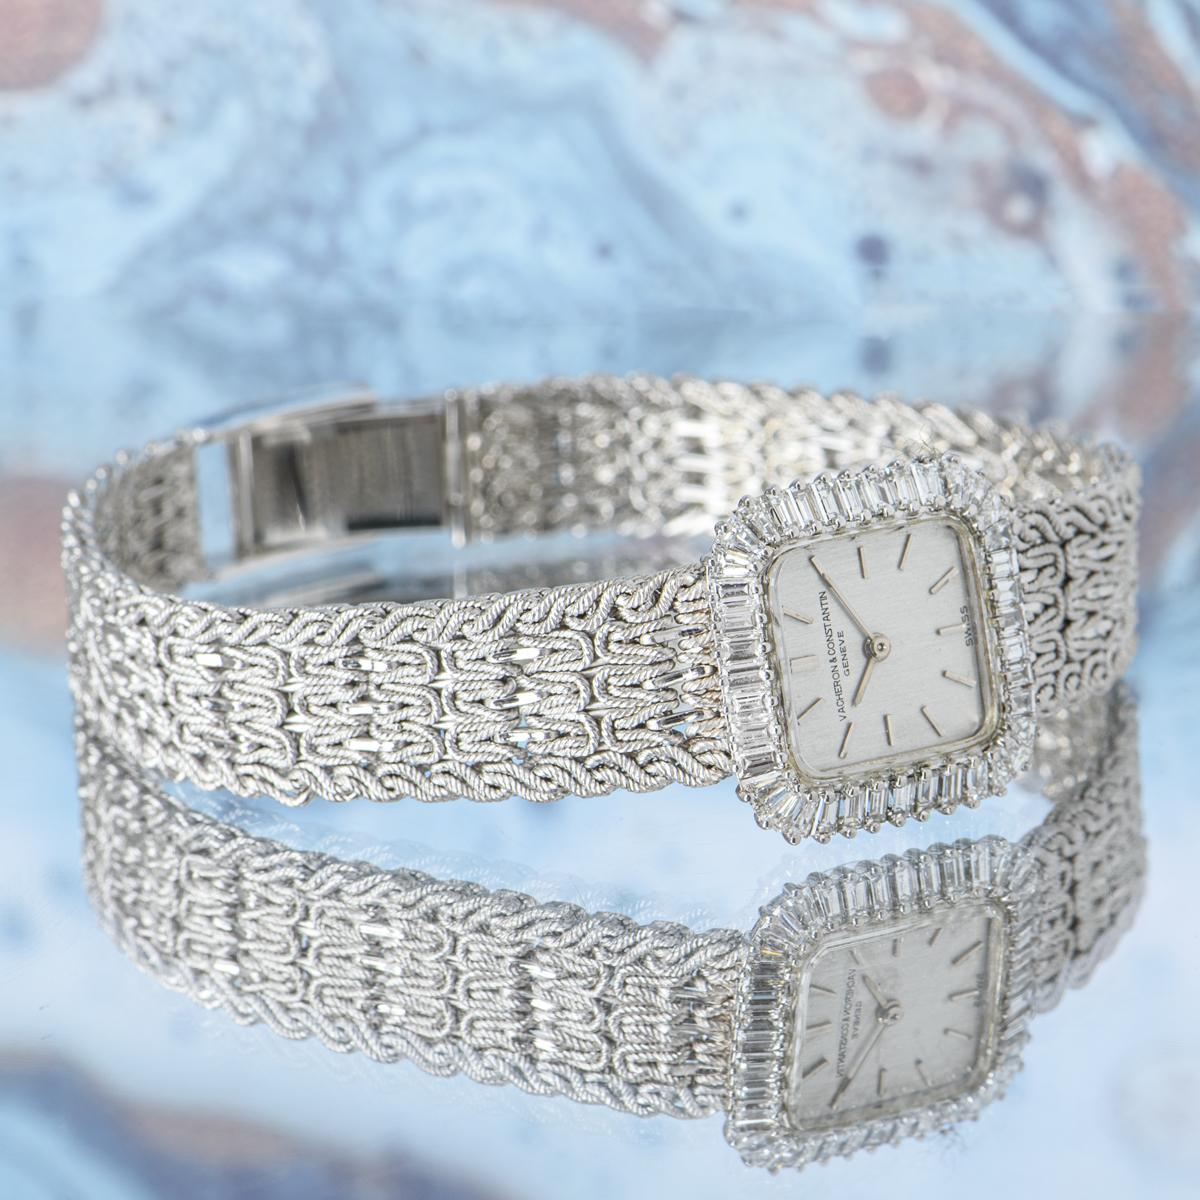 Vacheron Constantin Cocktail Watch White Gold Diamond Bezel F3.1046 In Excellent Condition For Sale In London, GB